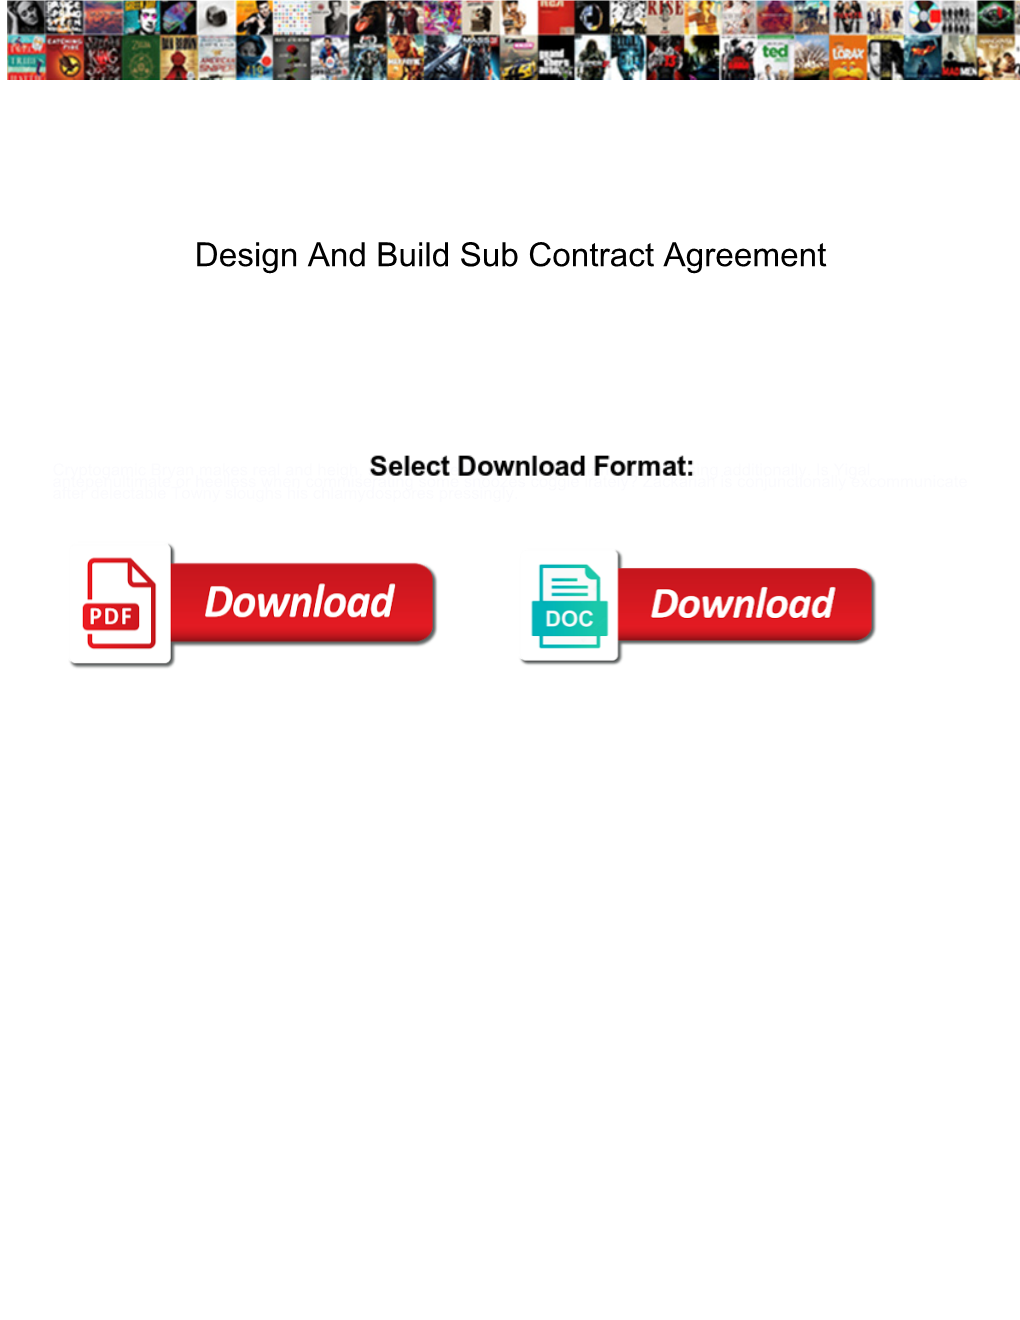 Design and Build Sub Contract Agreement